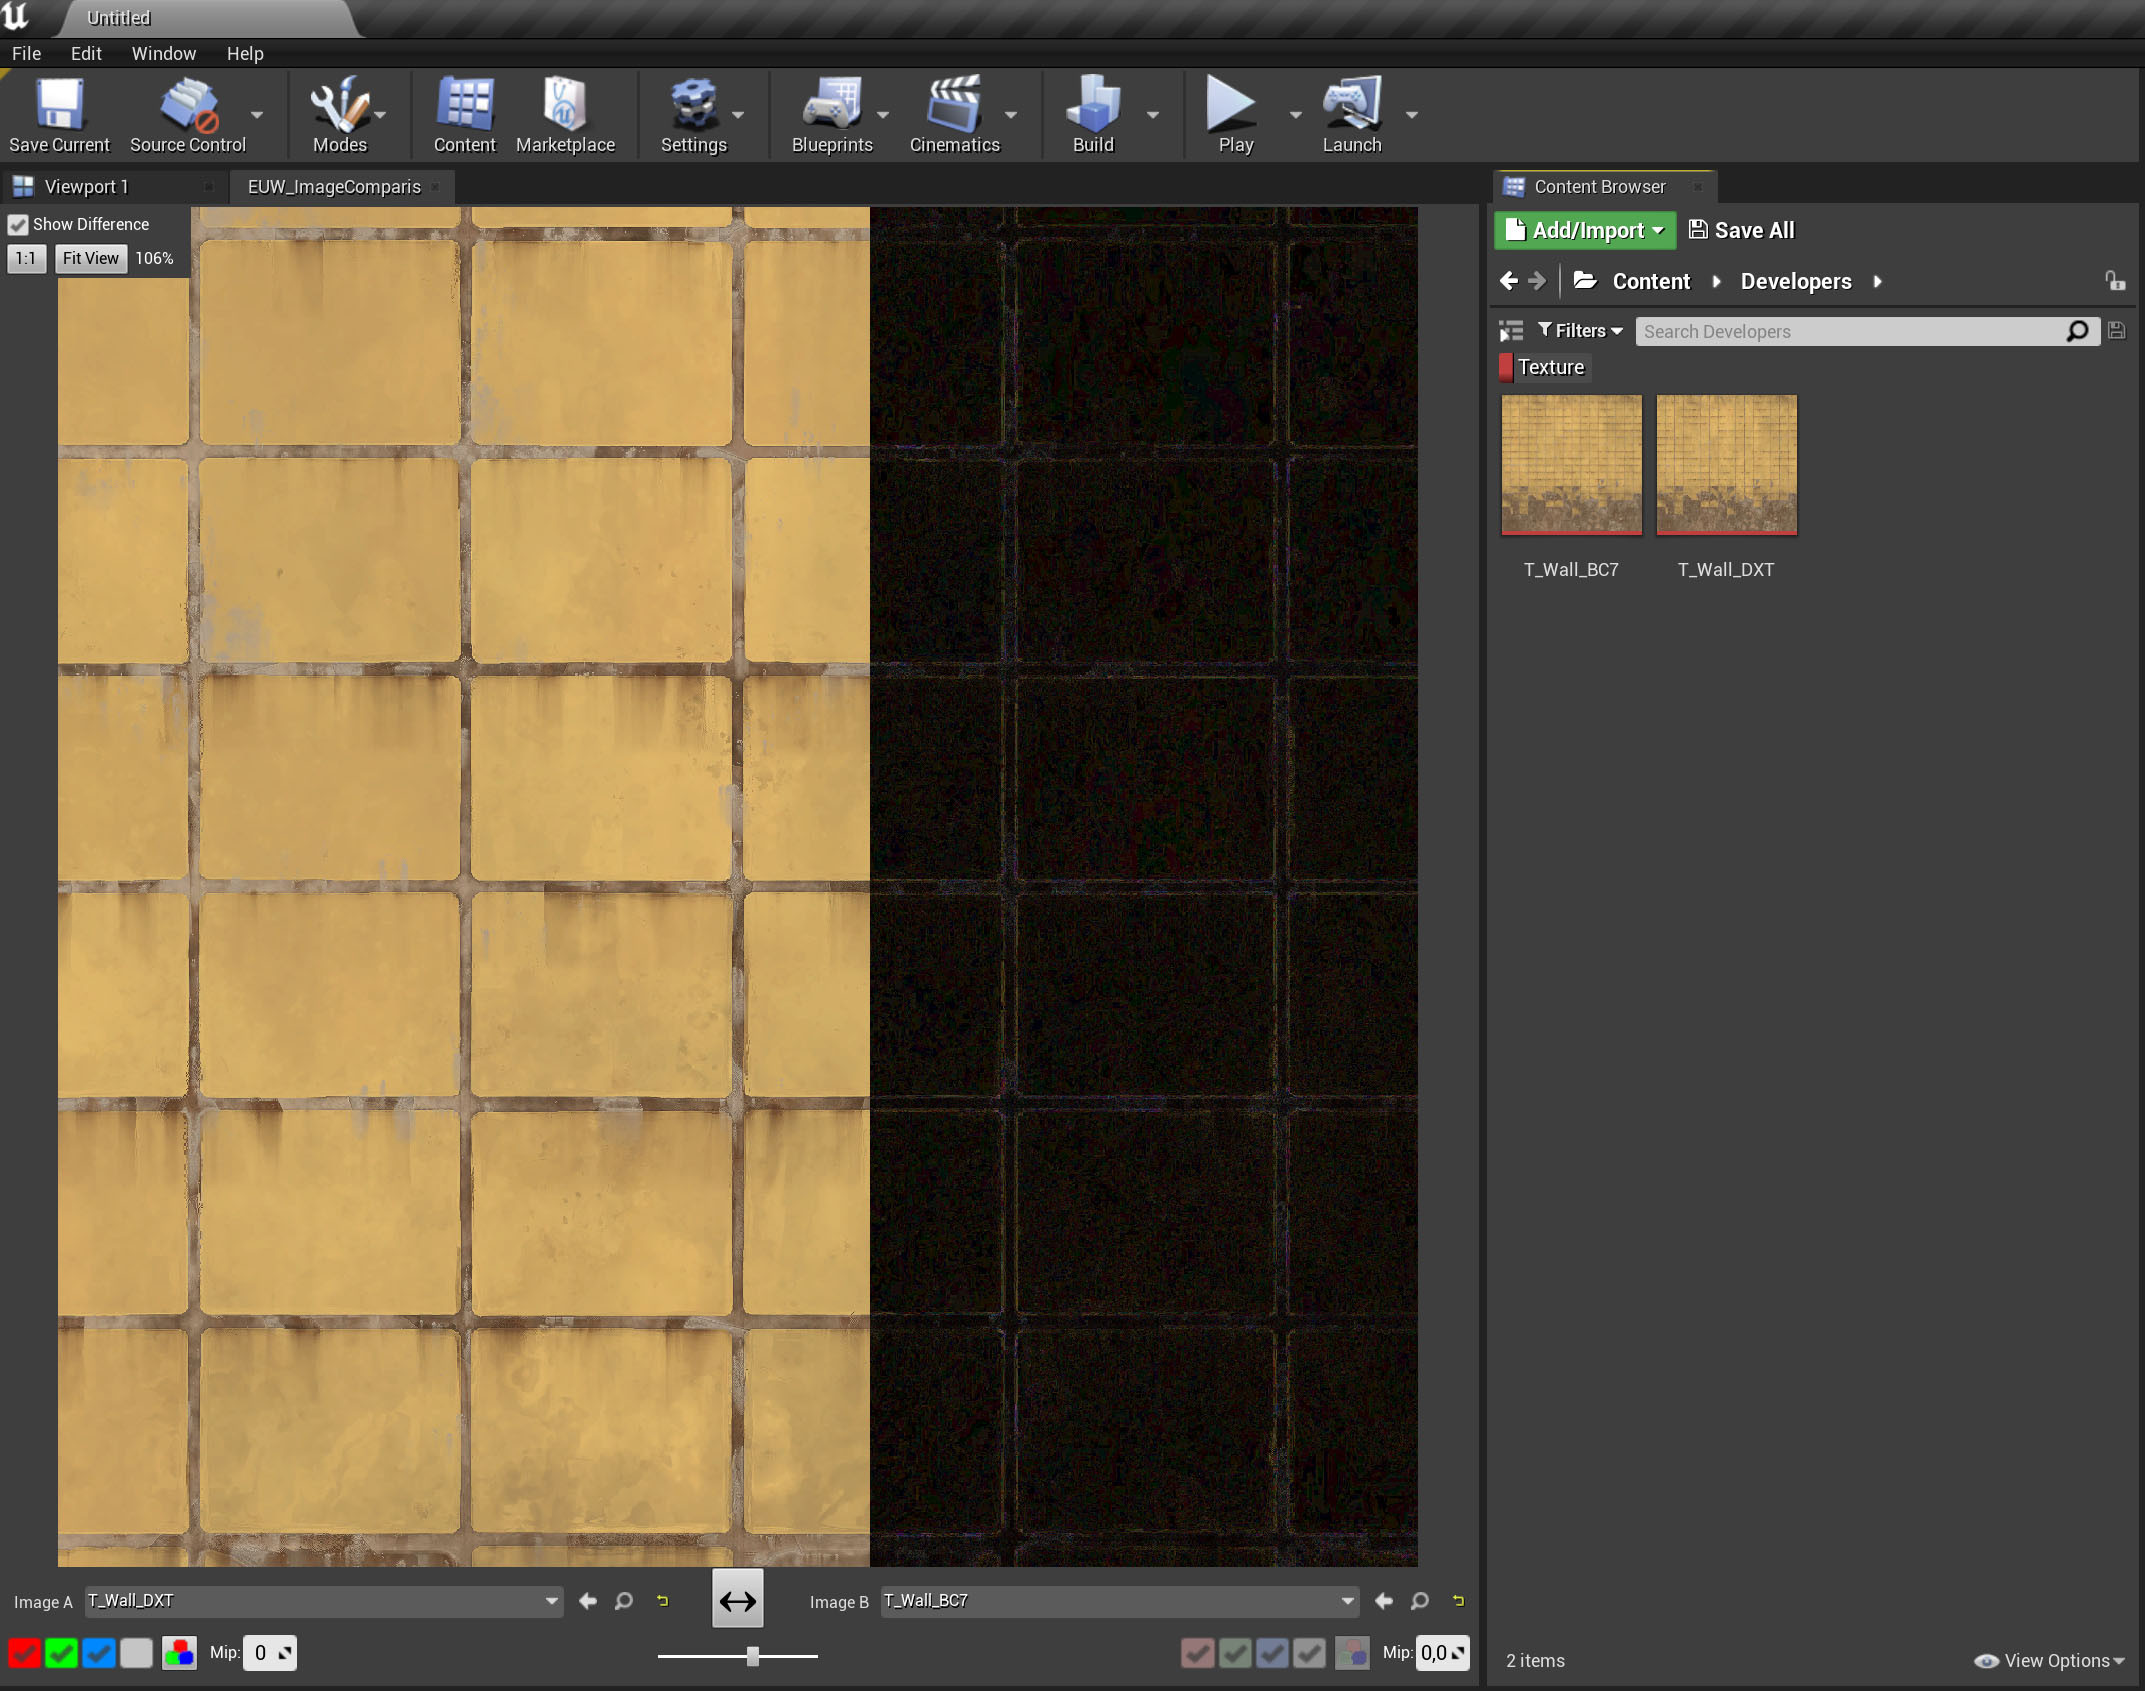 The difference view shows the differences between two differently compressed textures.